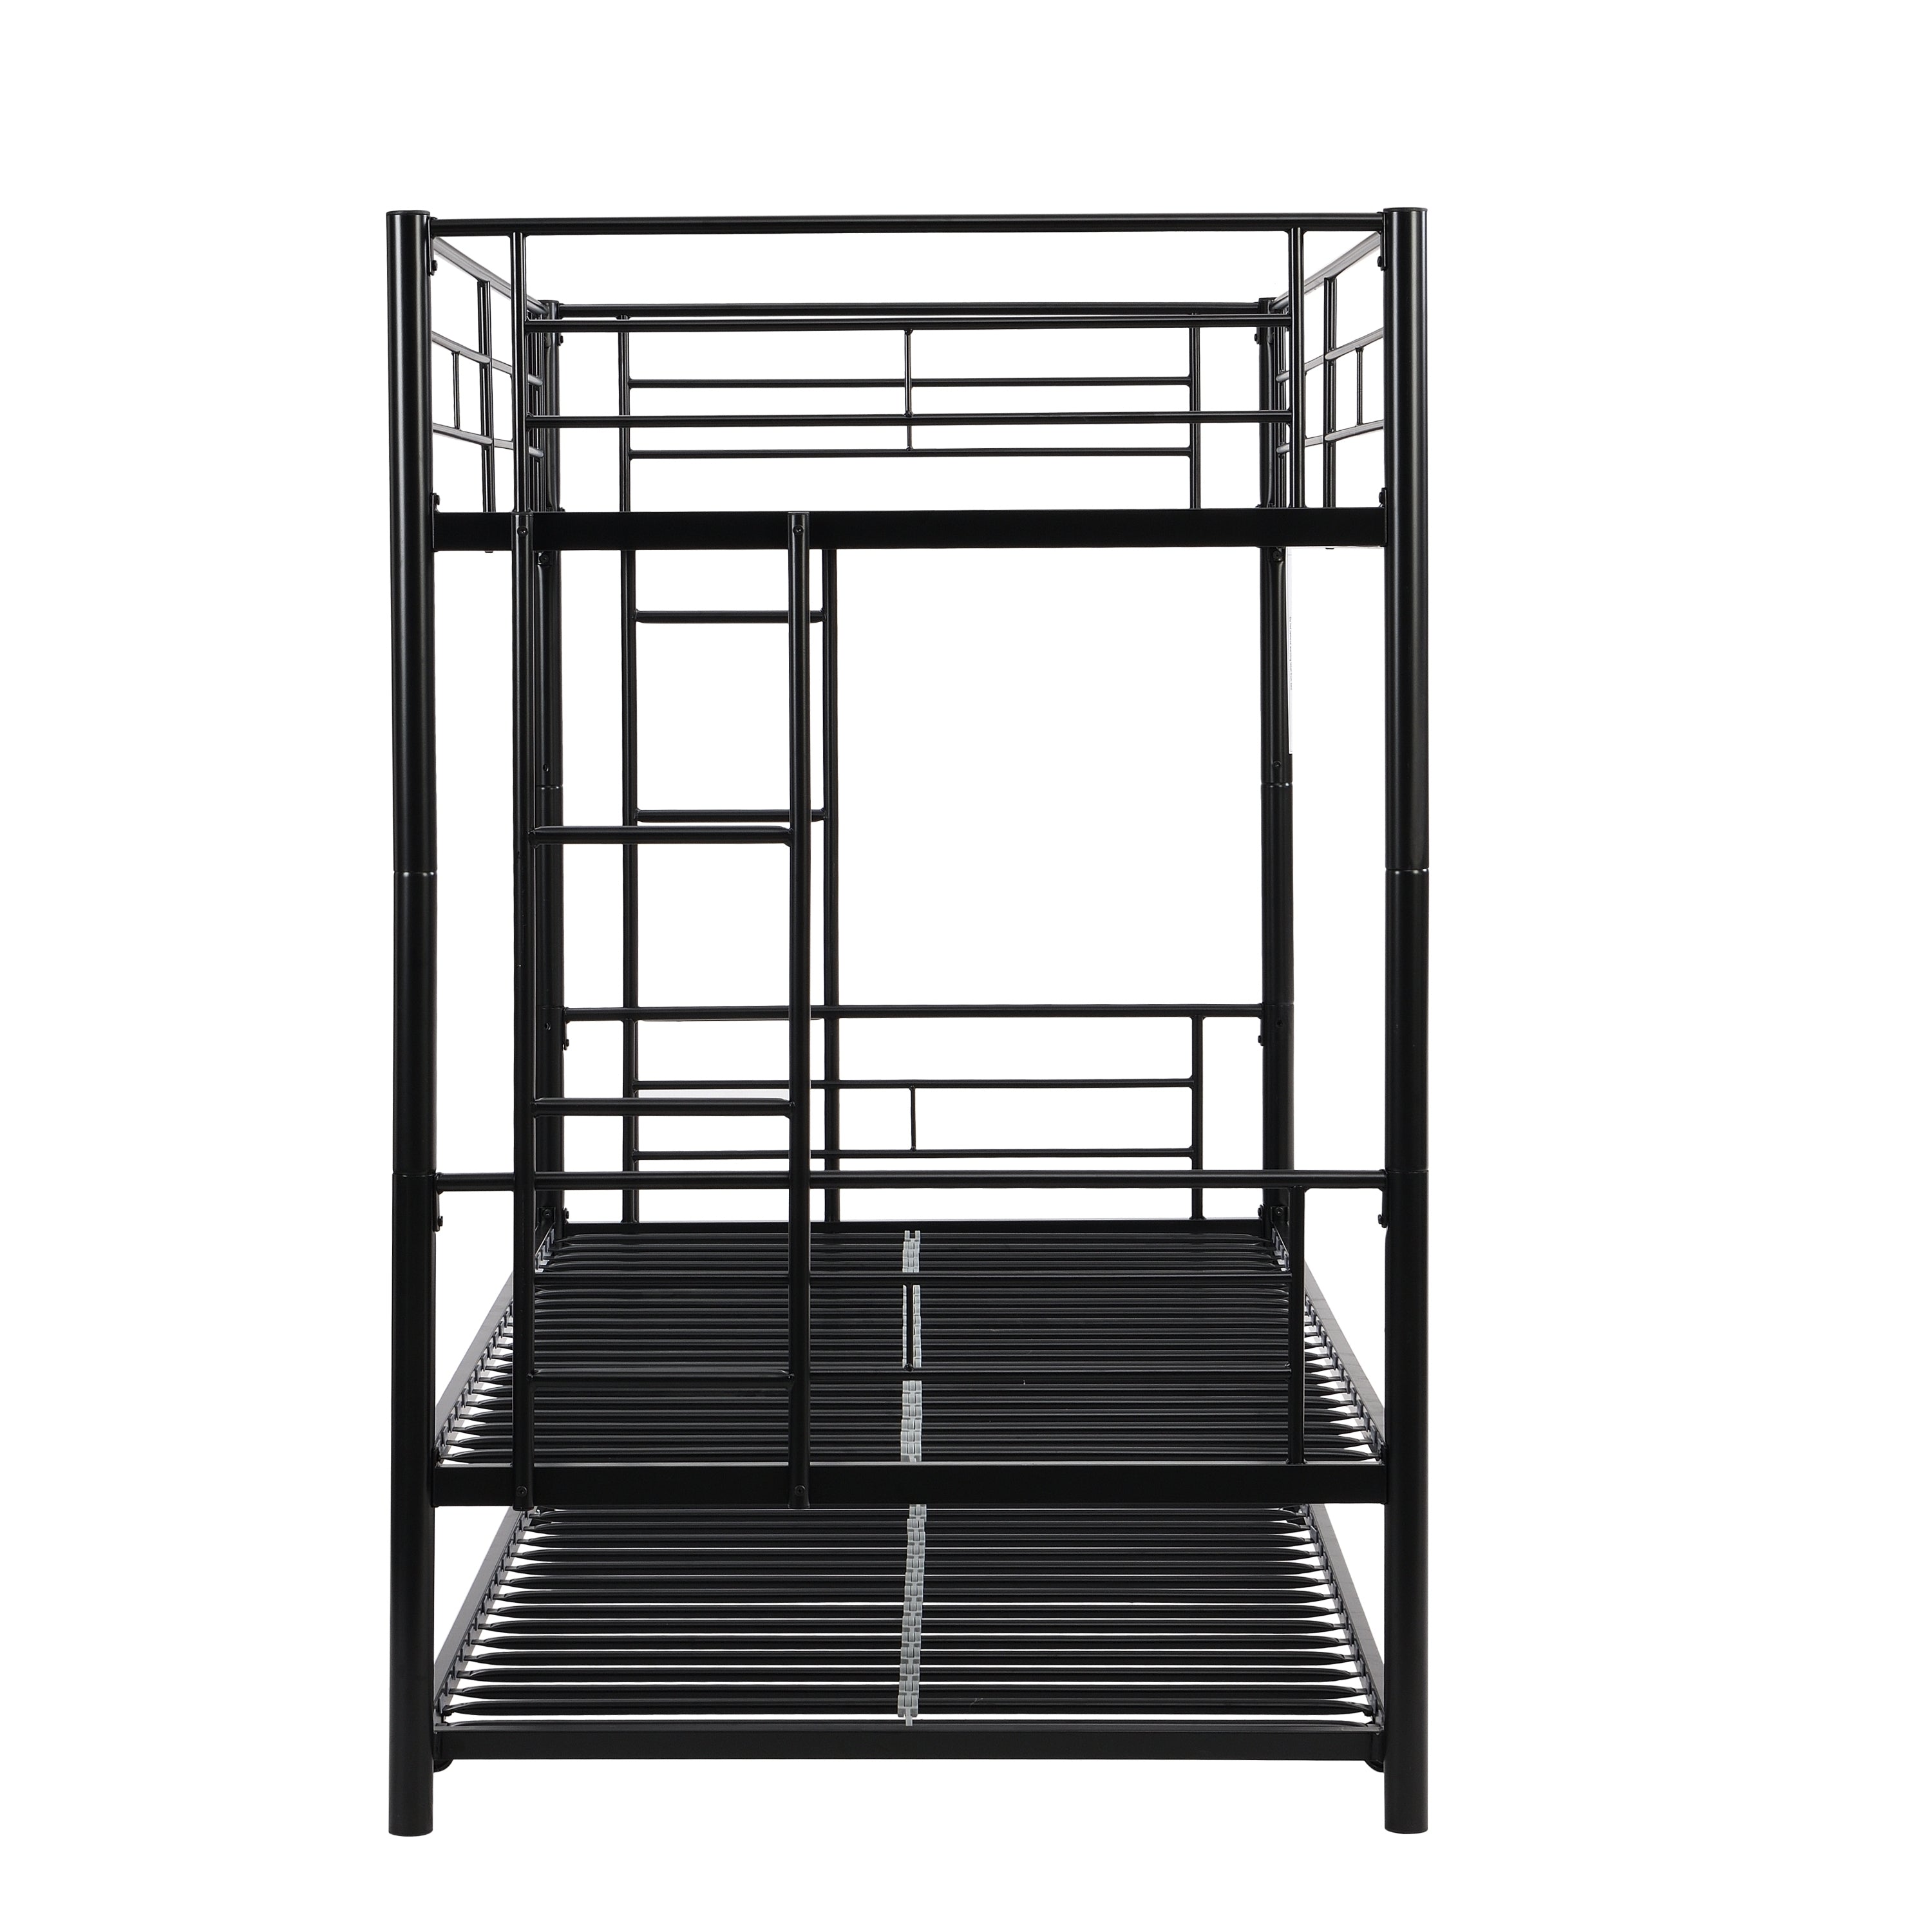 Black Metal Twin Bunk Bed with Trundle, Sturdy Guard Rail, 2 Ladders - Divisible into Two Beds - No Box Spring Needed - Noise-Free - Ideal for Kids/Adults in Dorms